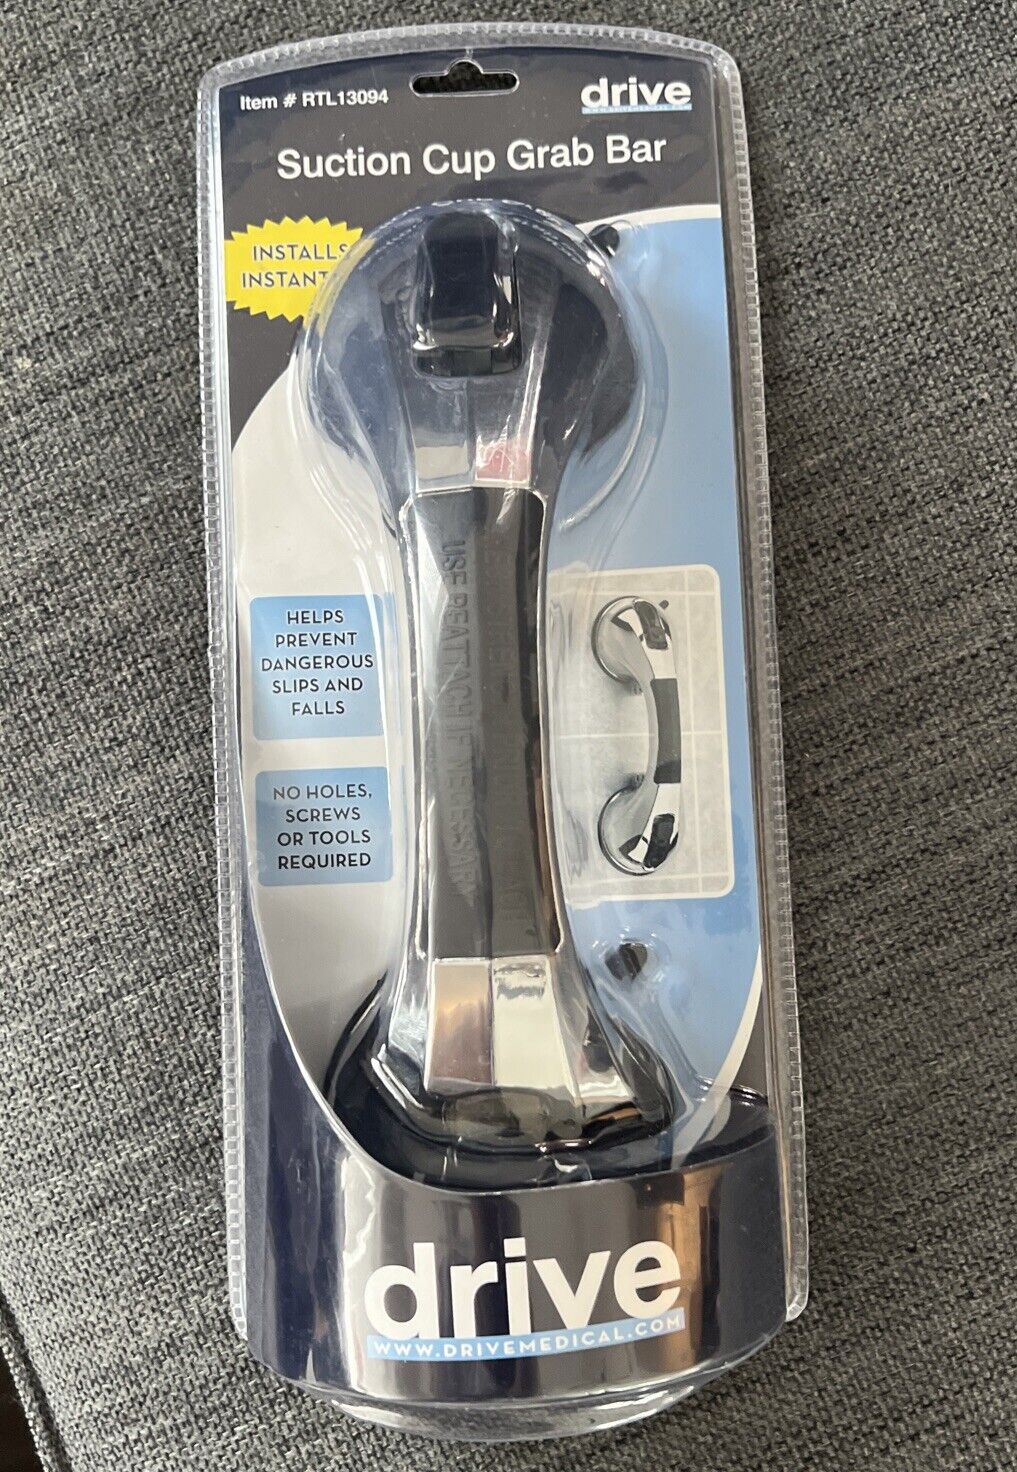 Brand New Drive Suction Cup Grab Bar, 12", Chrome And Black